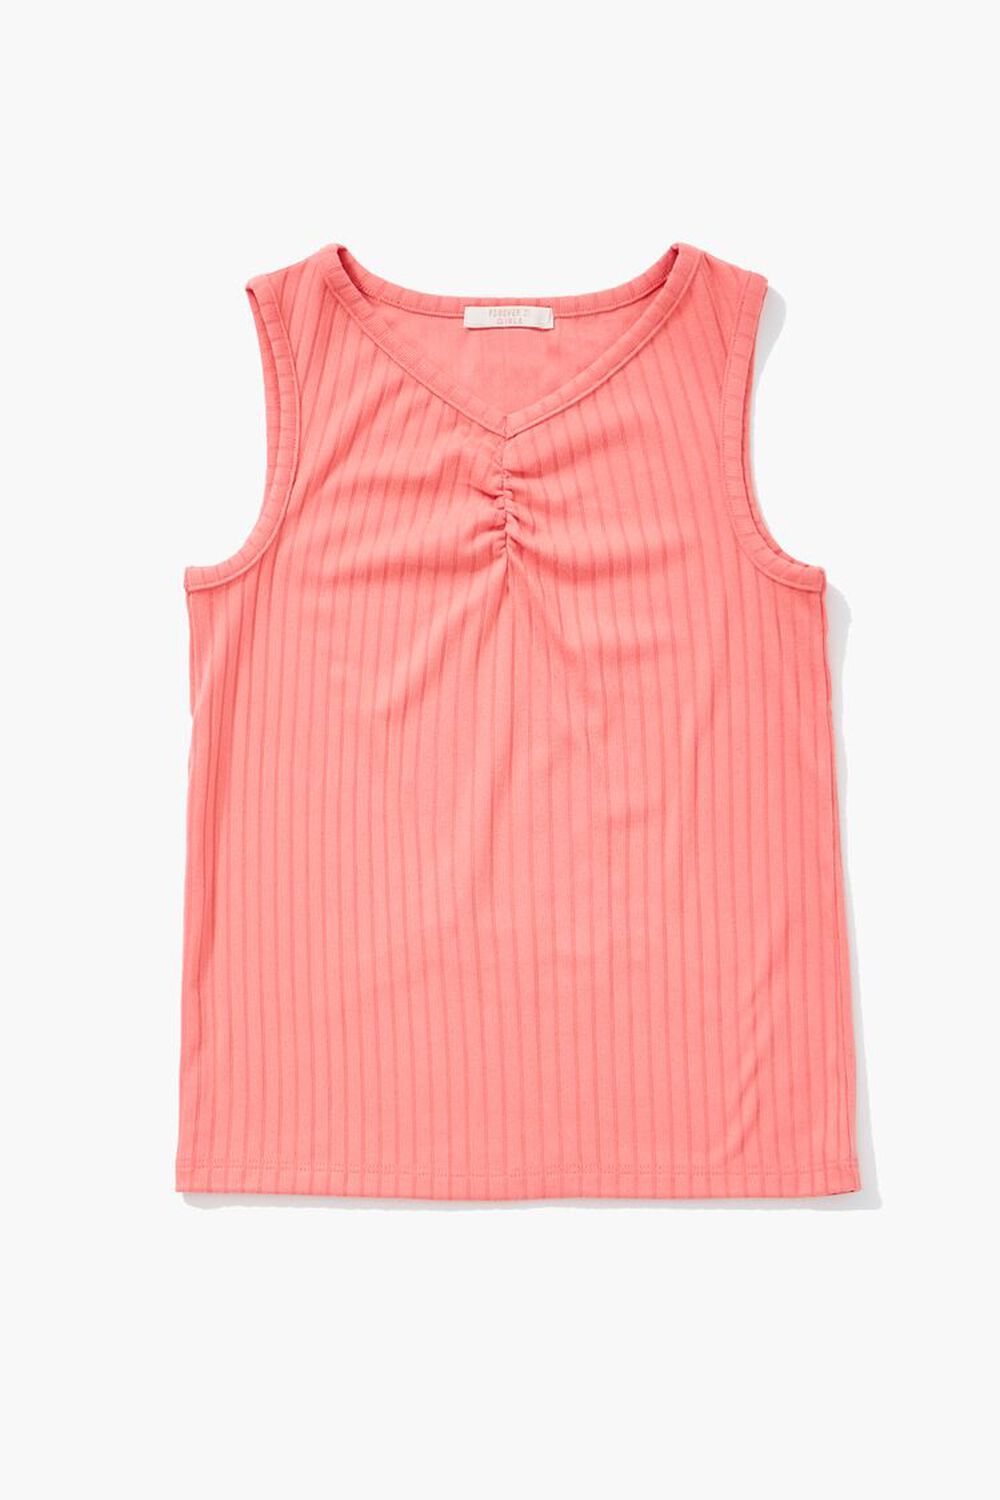 CORAL Girls Ribbed Ruched Tank Top (Kids), image 1